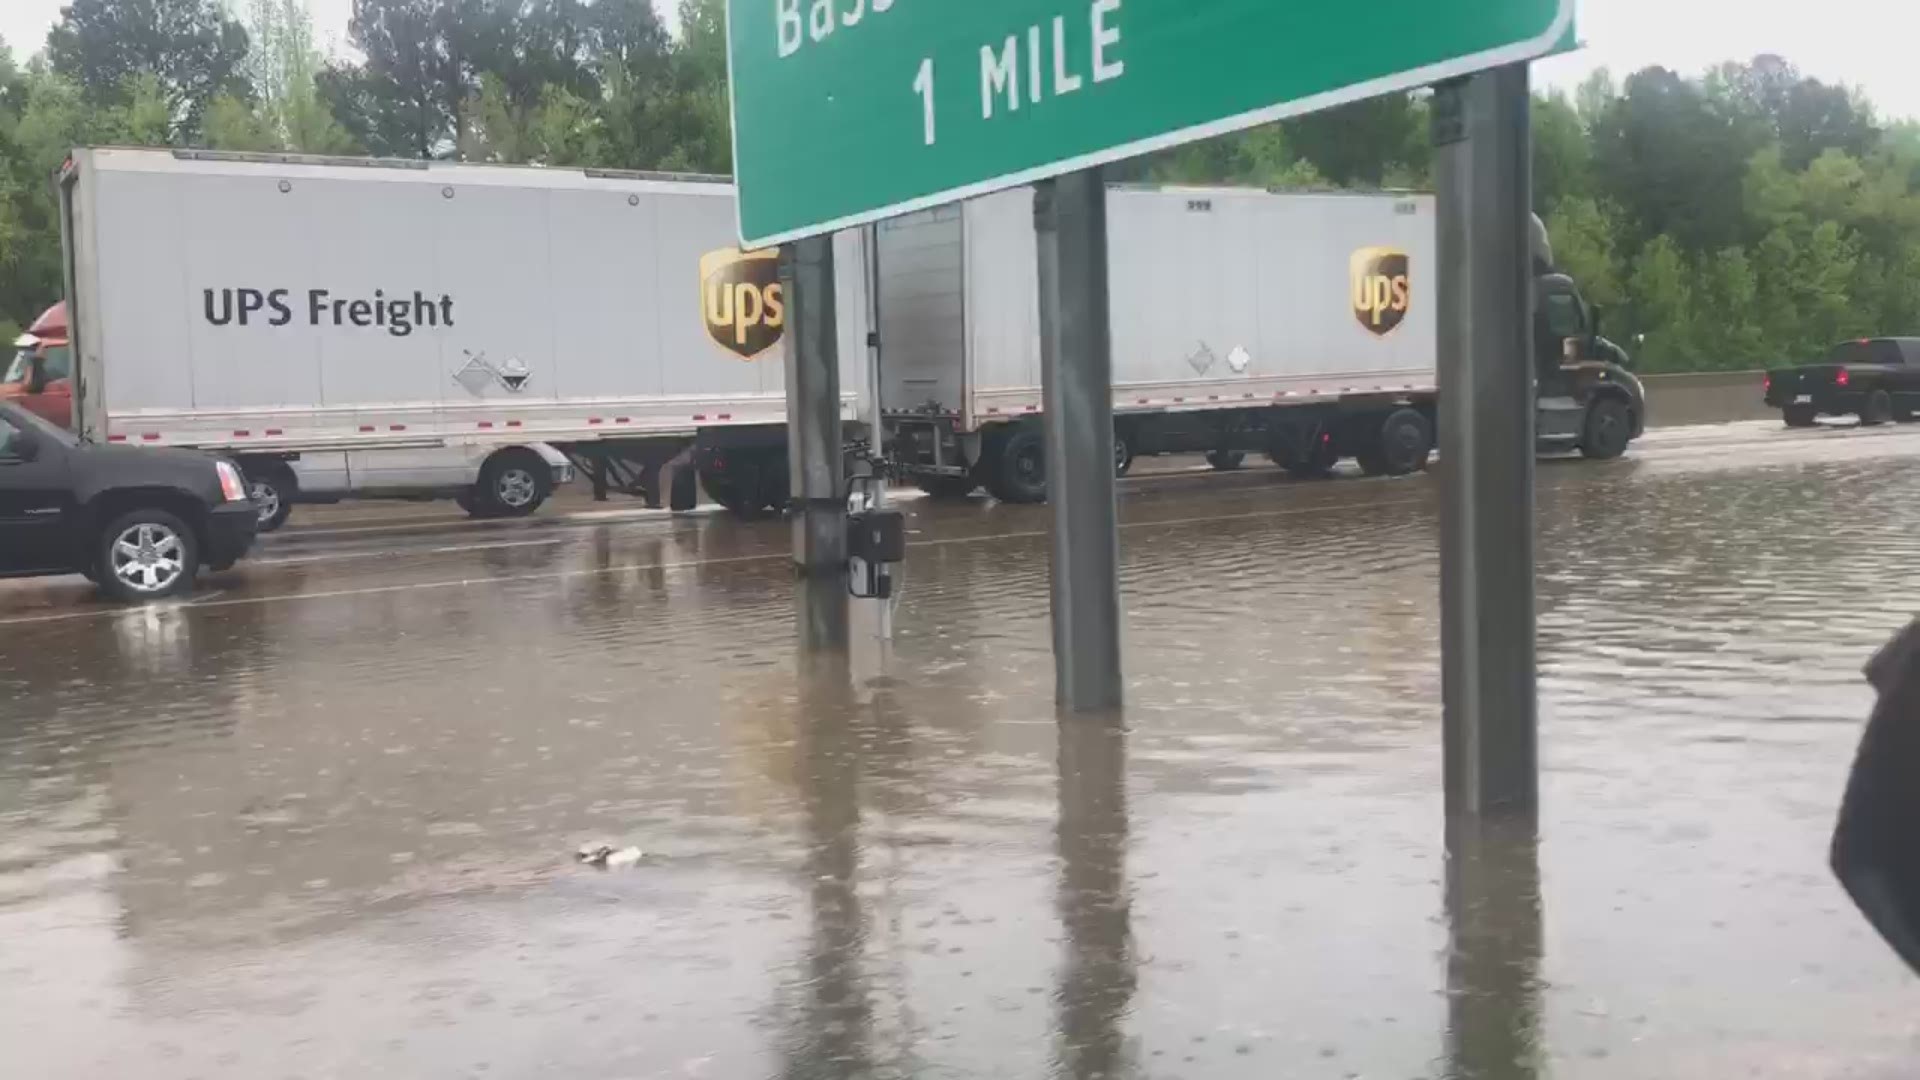 I-30 near Alexander exit has a major closure due to high water.